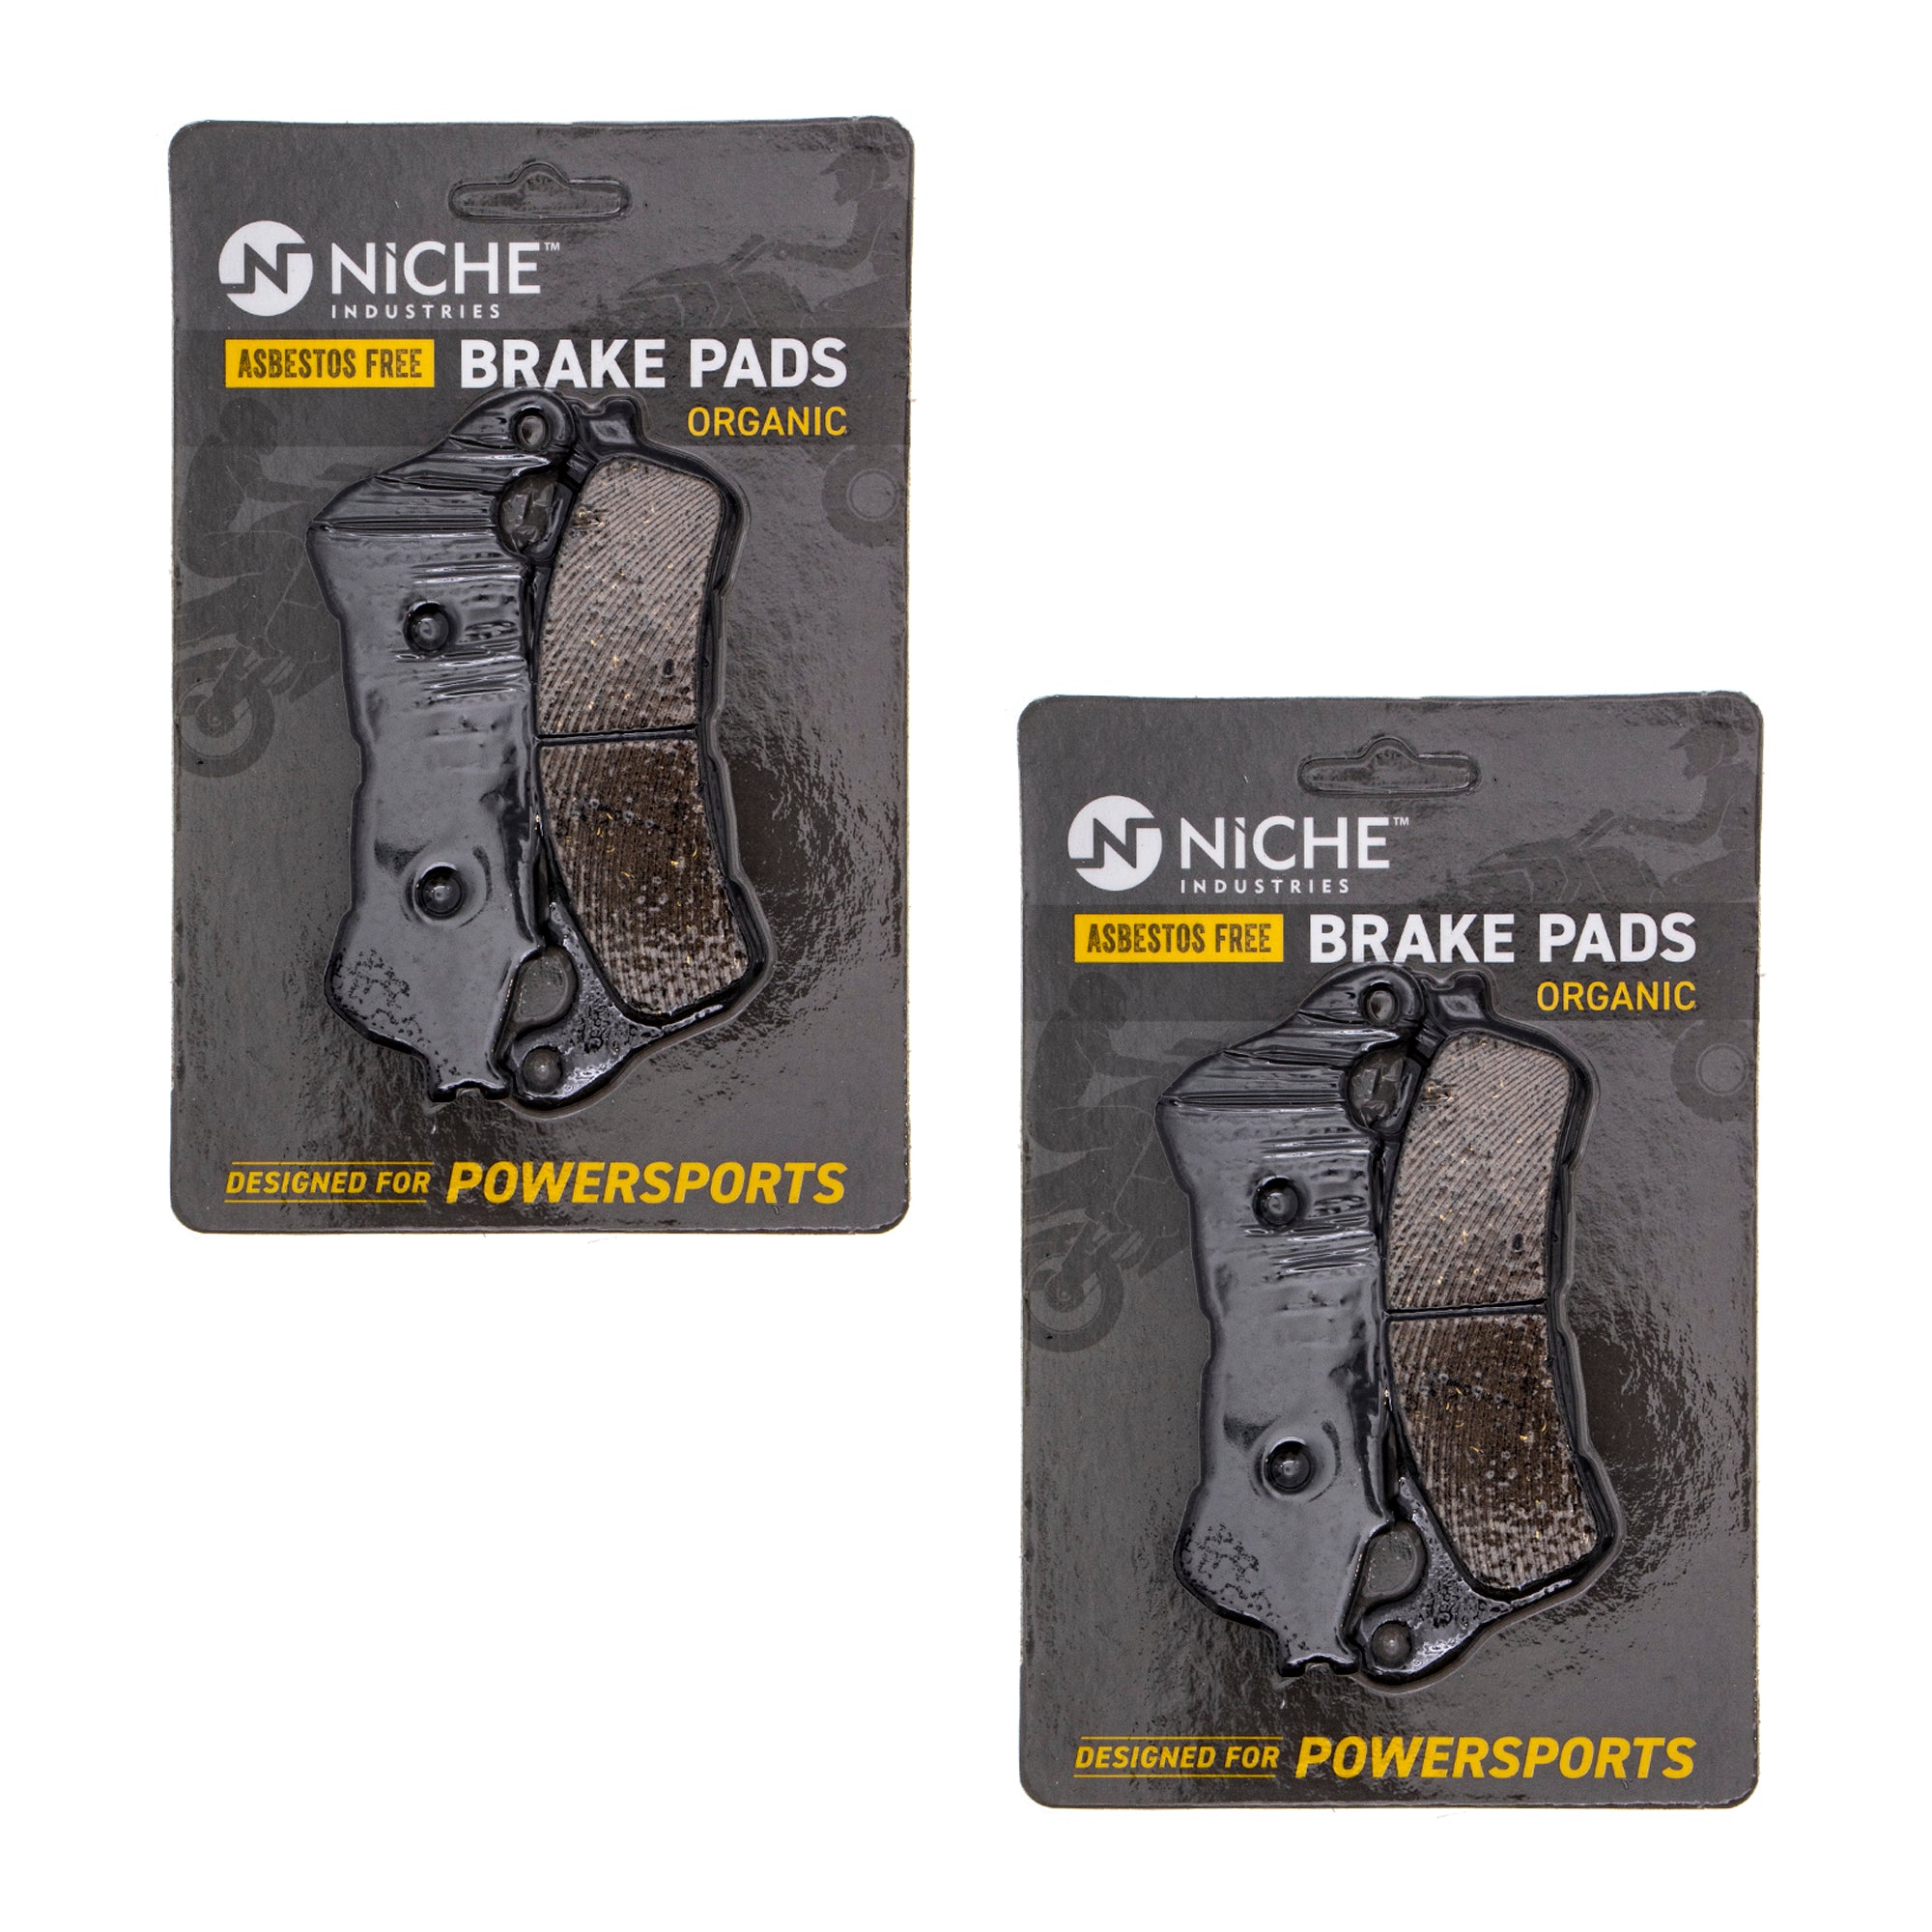 Brake Pad Set (Front & Rear) 2-Pack for zOTHER Honda Stateline ST1300 Shadow Sabre NICHE 519-KPA2536D